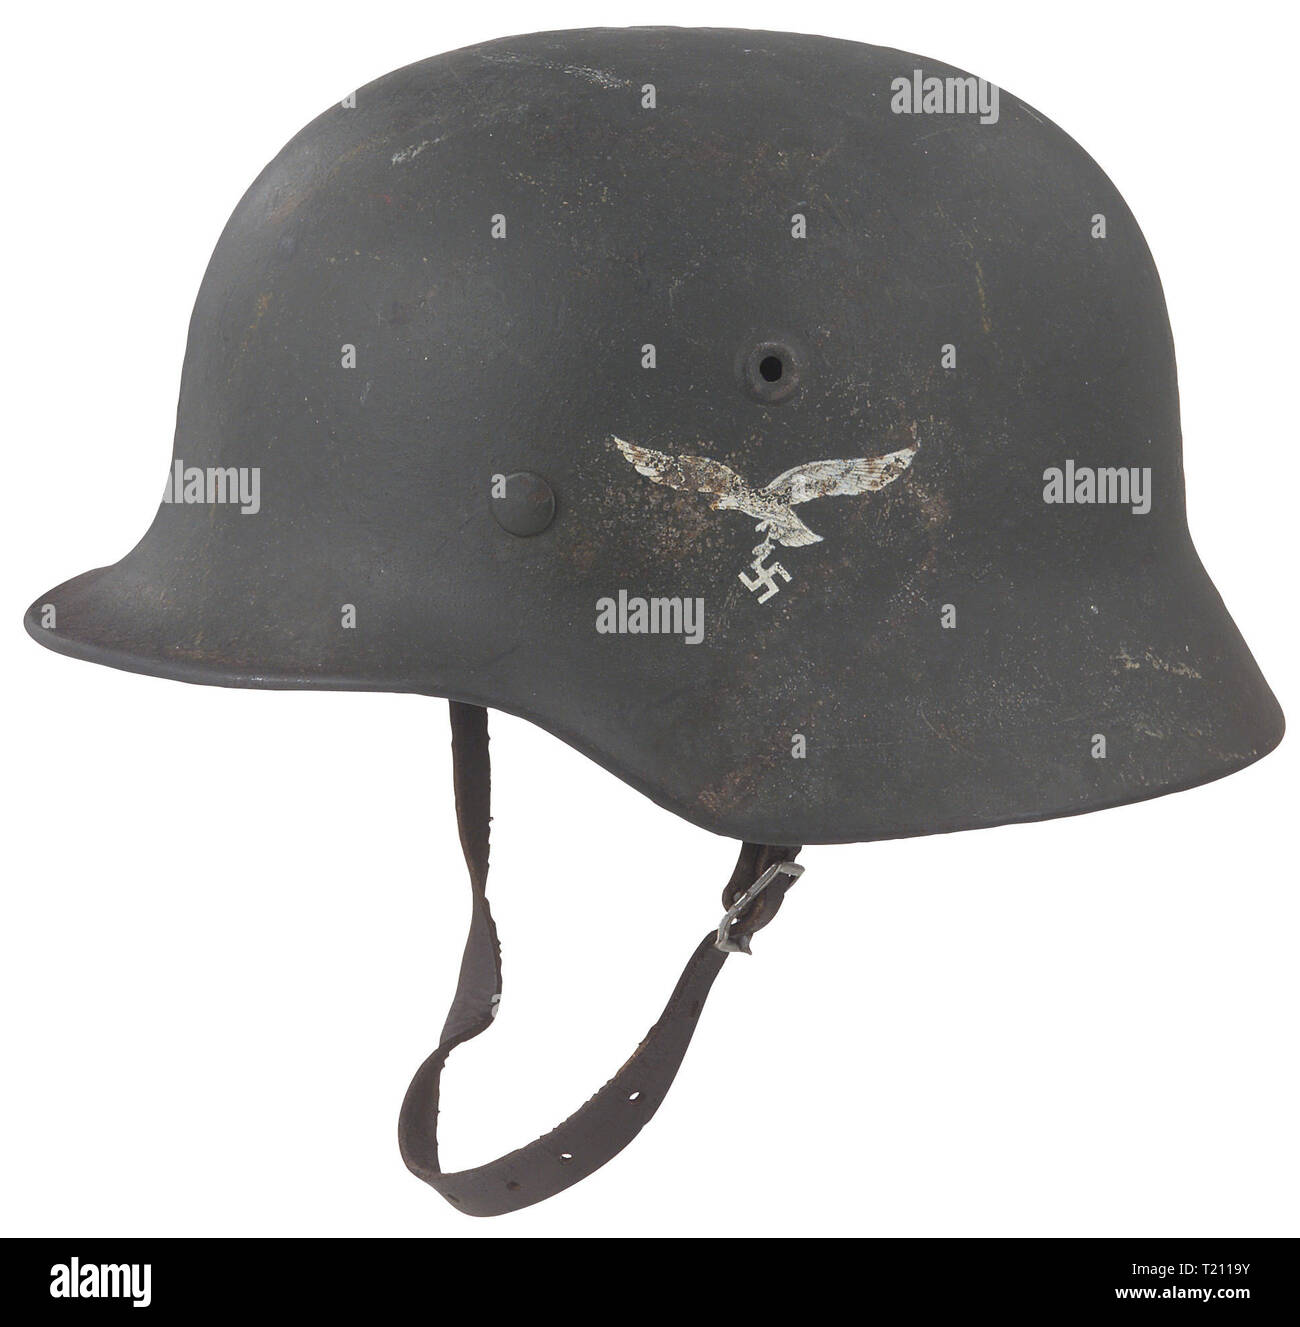 Body armour, helmets, German steel helmet M40, Body armour, helmets, German steel helmet M40, Luftwaffe (Air Force) pattern, Editorial-Use-Only Stock Photo